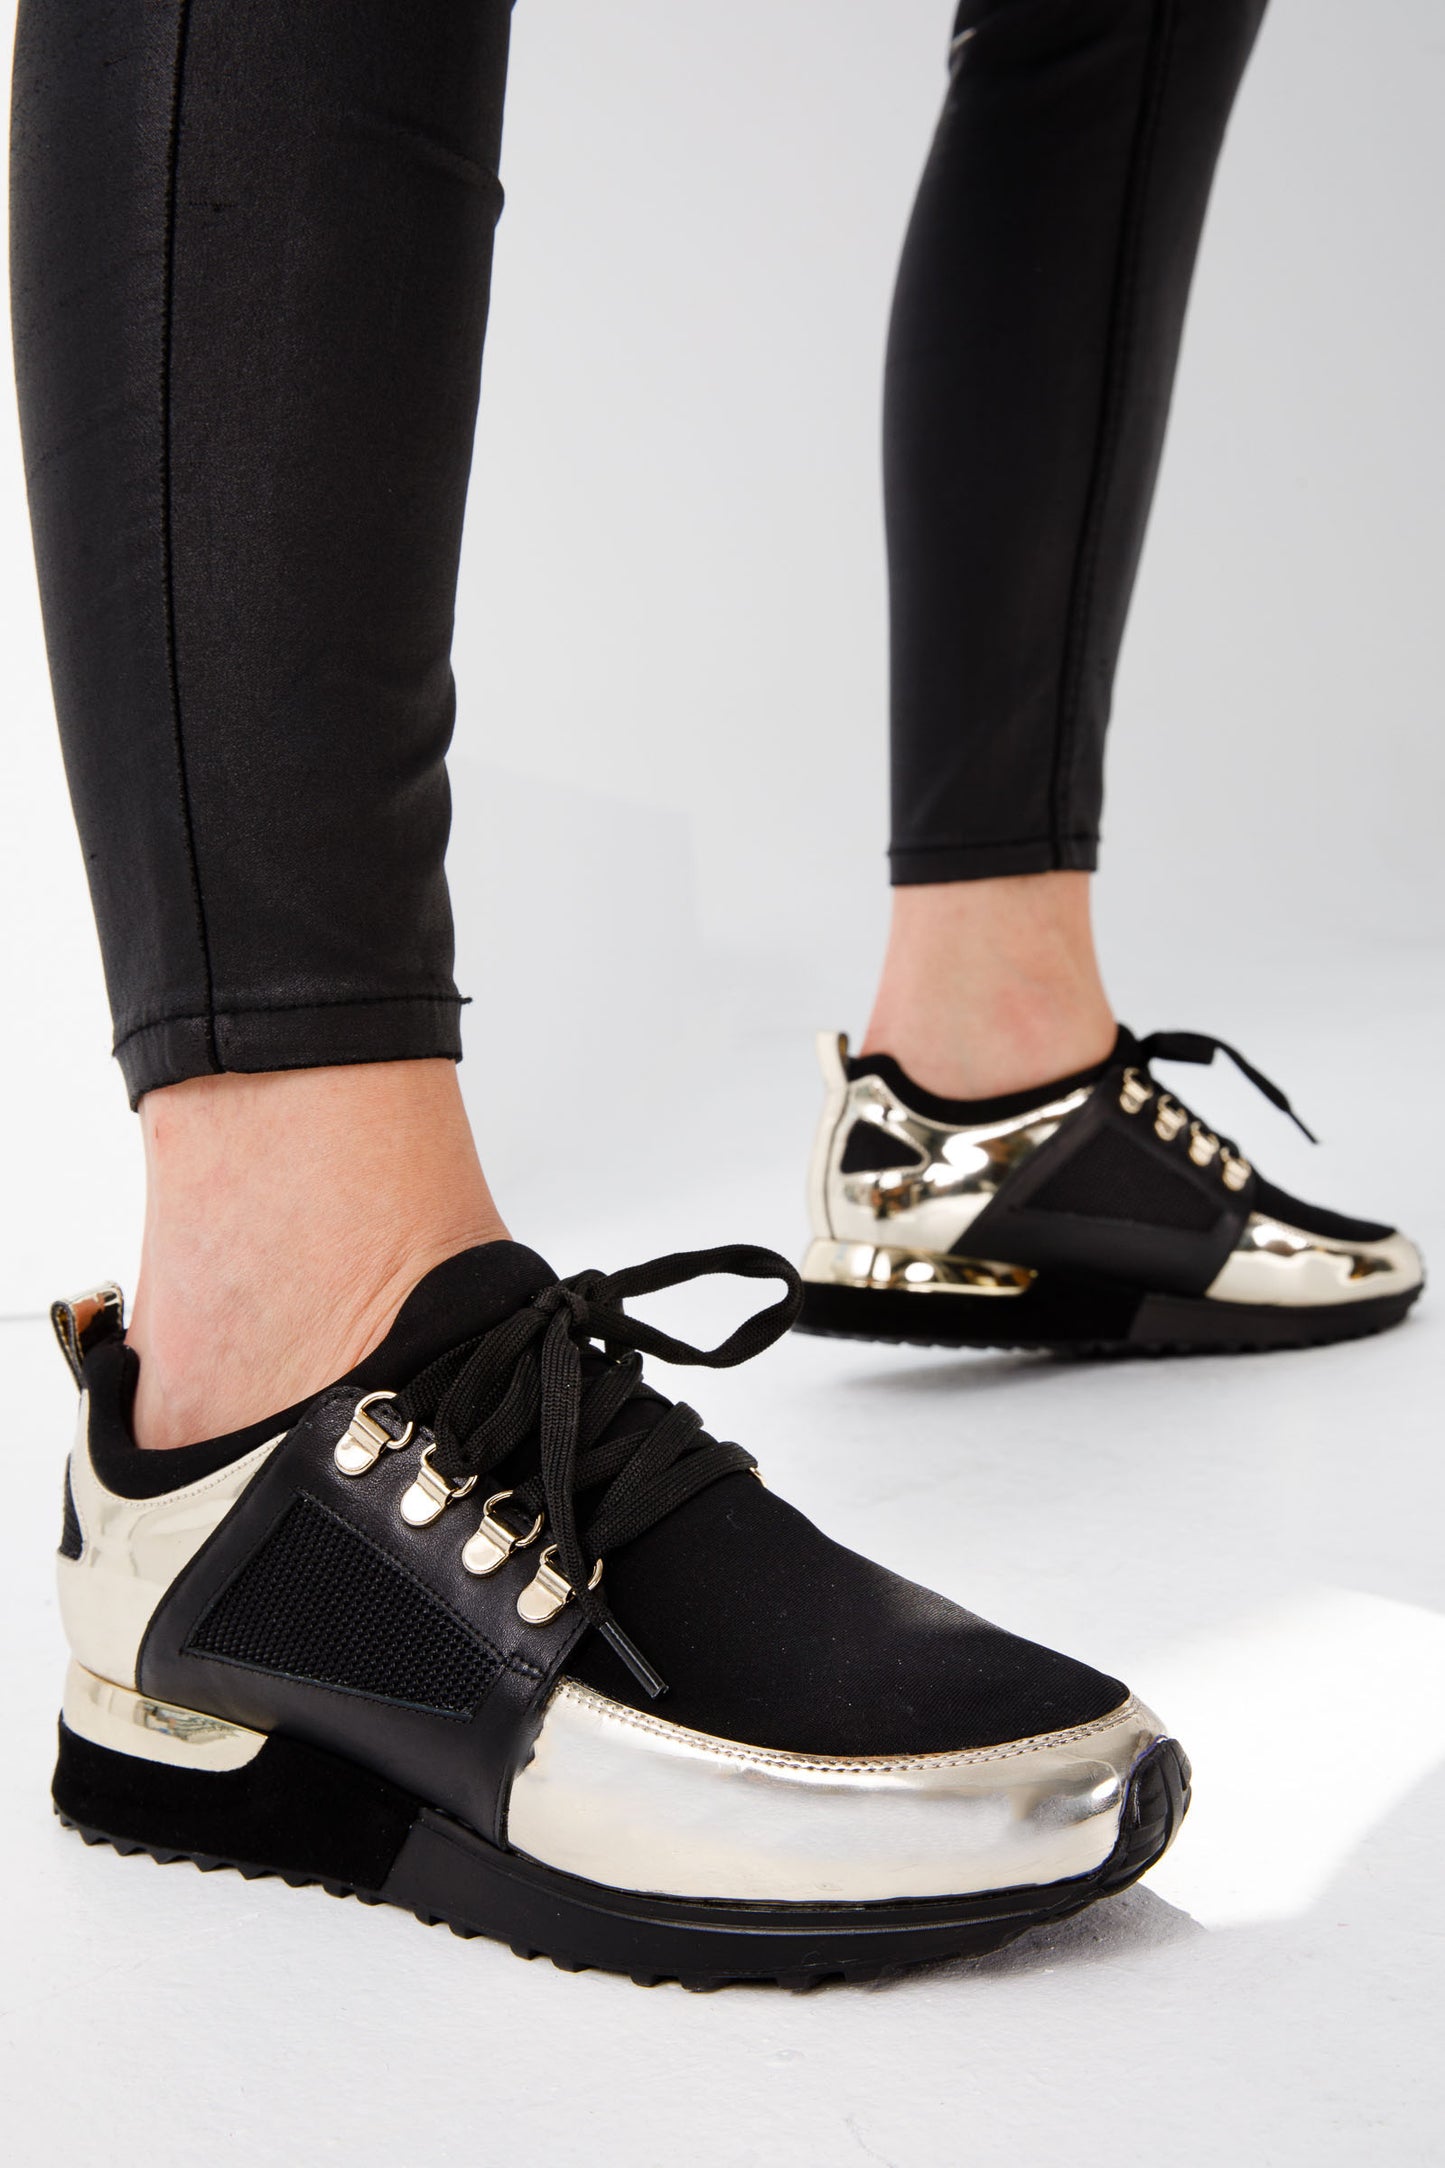 The Emir Gold Leather Women Sneaker Limited Edition